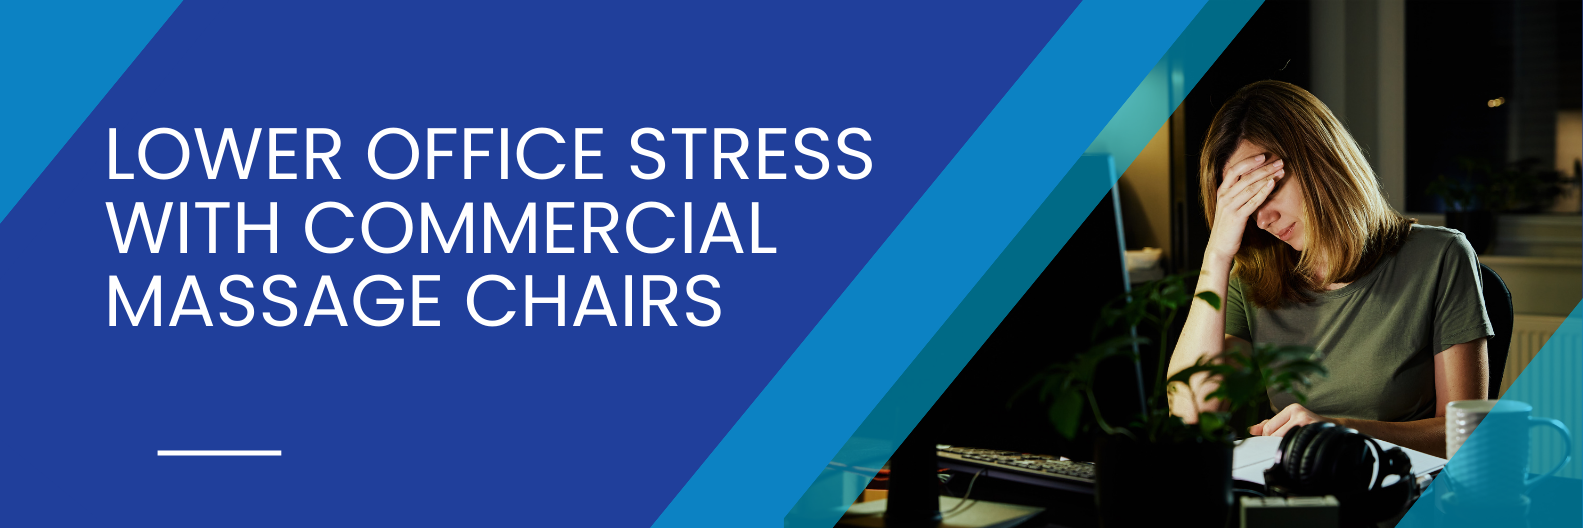 Explore the Stress-Relief Benefits of Commercial Massage Chairs for Offices. Understand the Impact and Advantages of Implementing Massage Chairs in Workplaces.